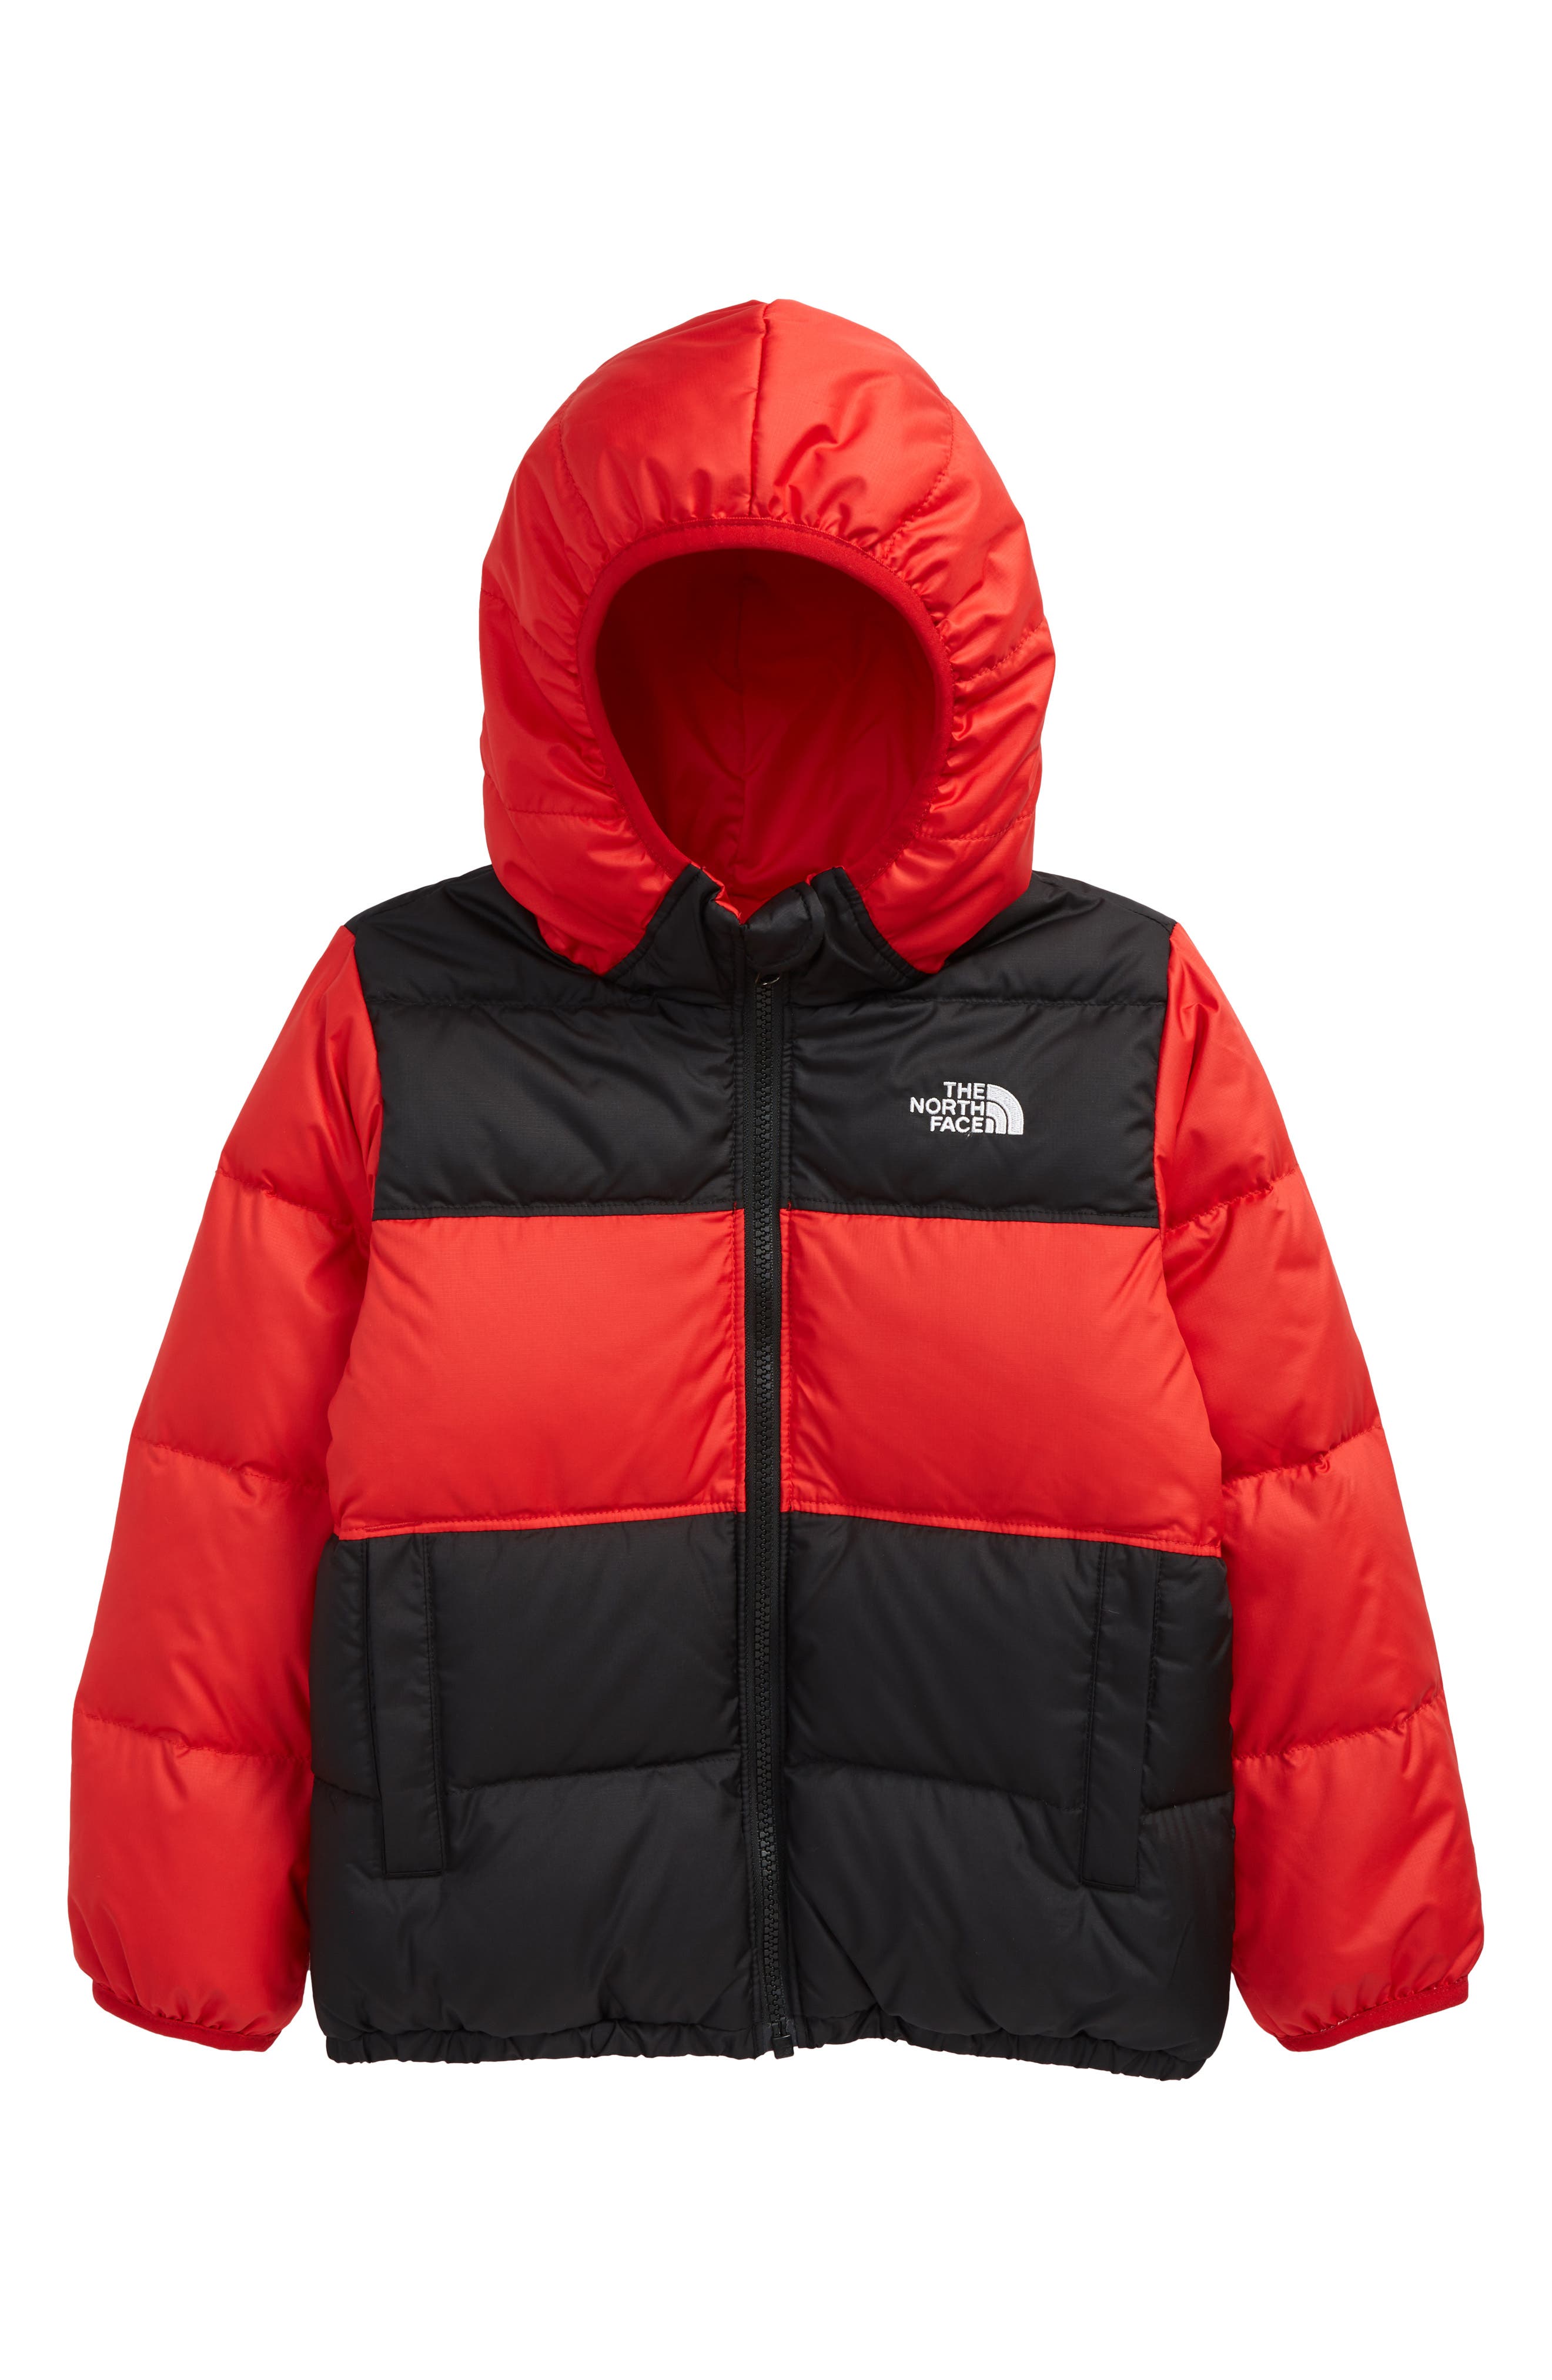 The North Face 'Moondoggy' Water 